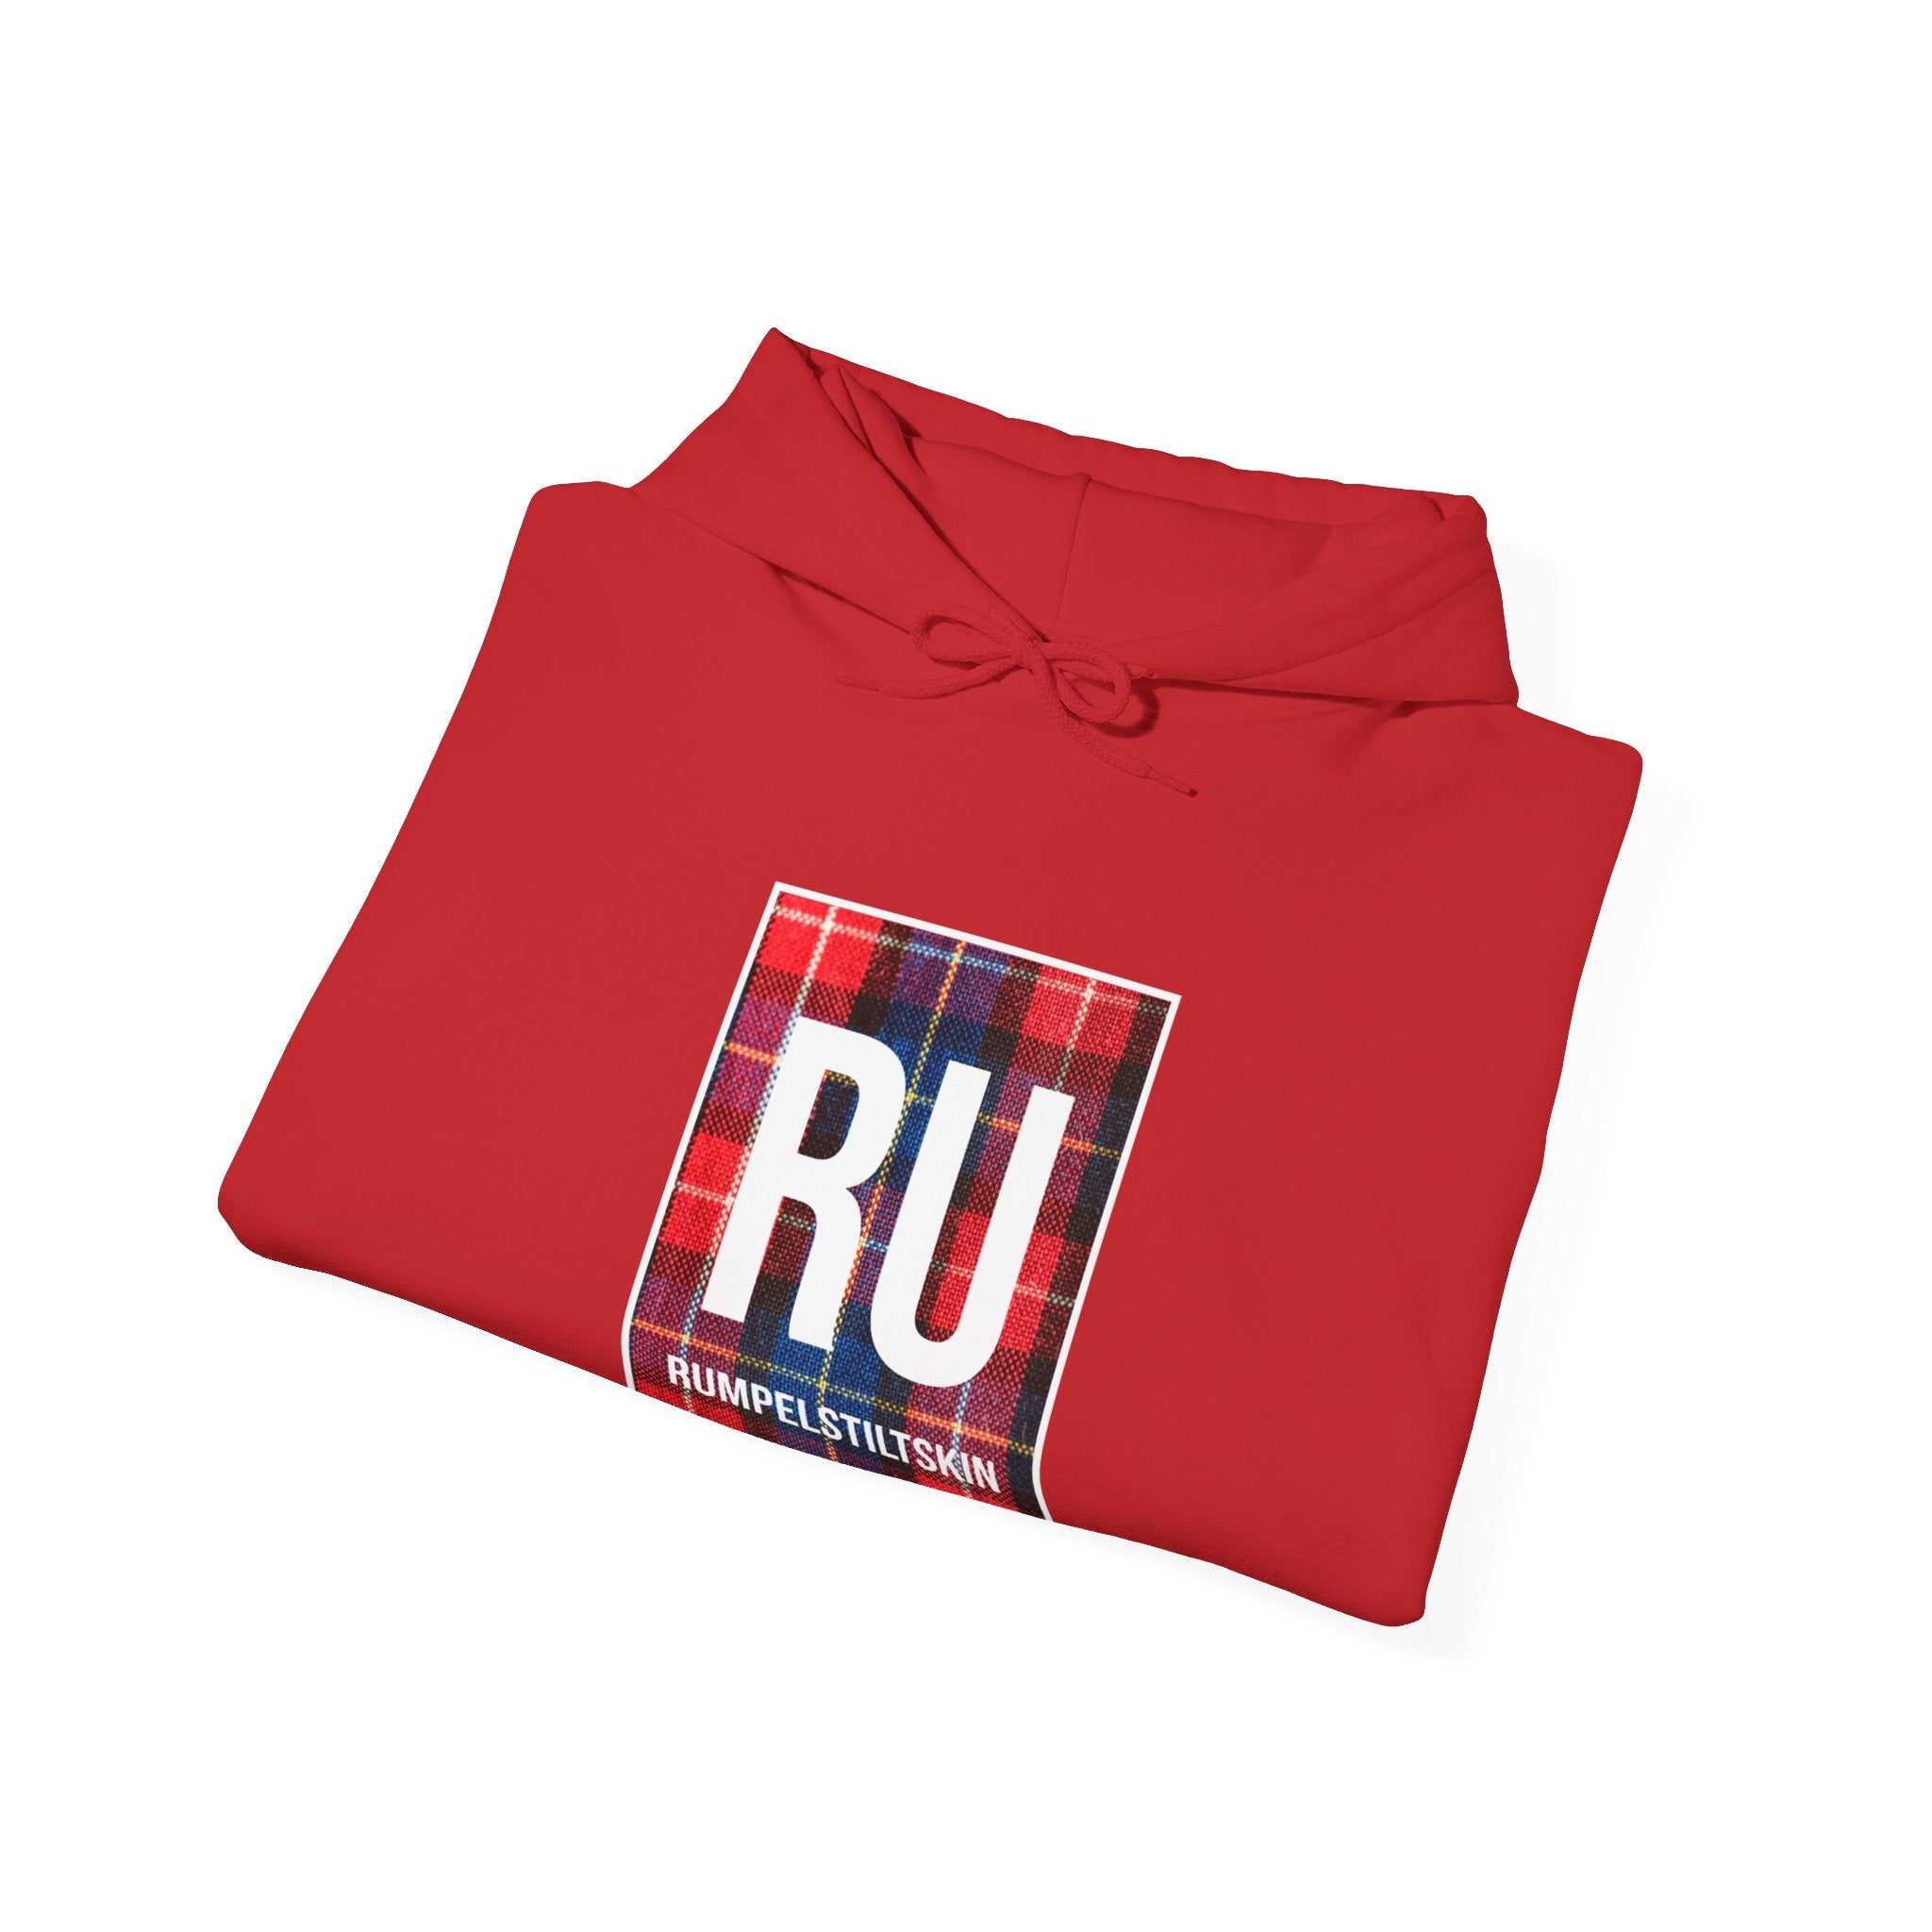 RU - Hooded Sweatshirt with a "RU" logo in a plaid pattern above the word "Rumpelstiltskin," offering ultimate comfort, style, and ease.